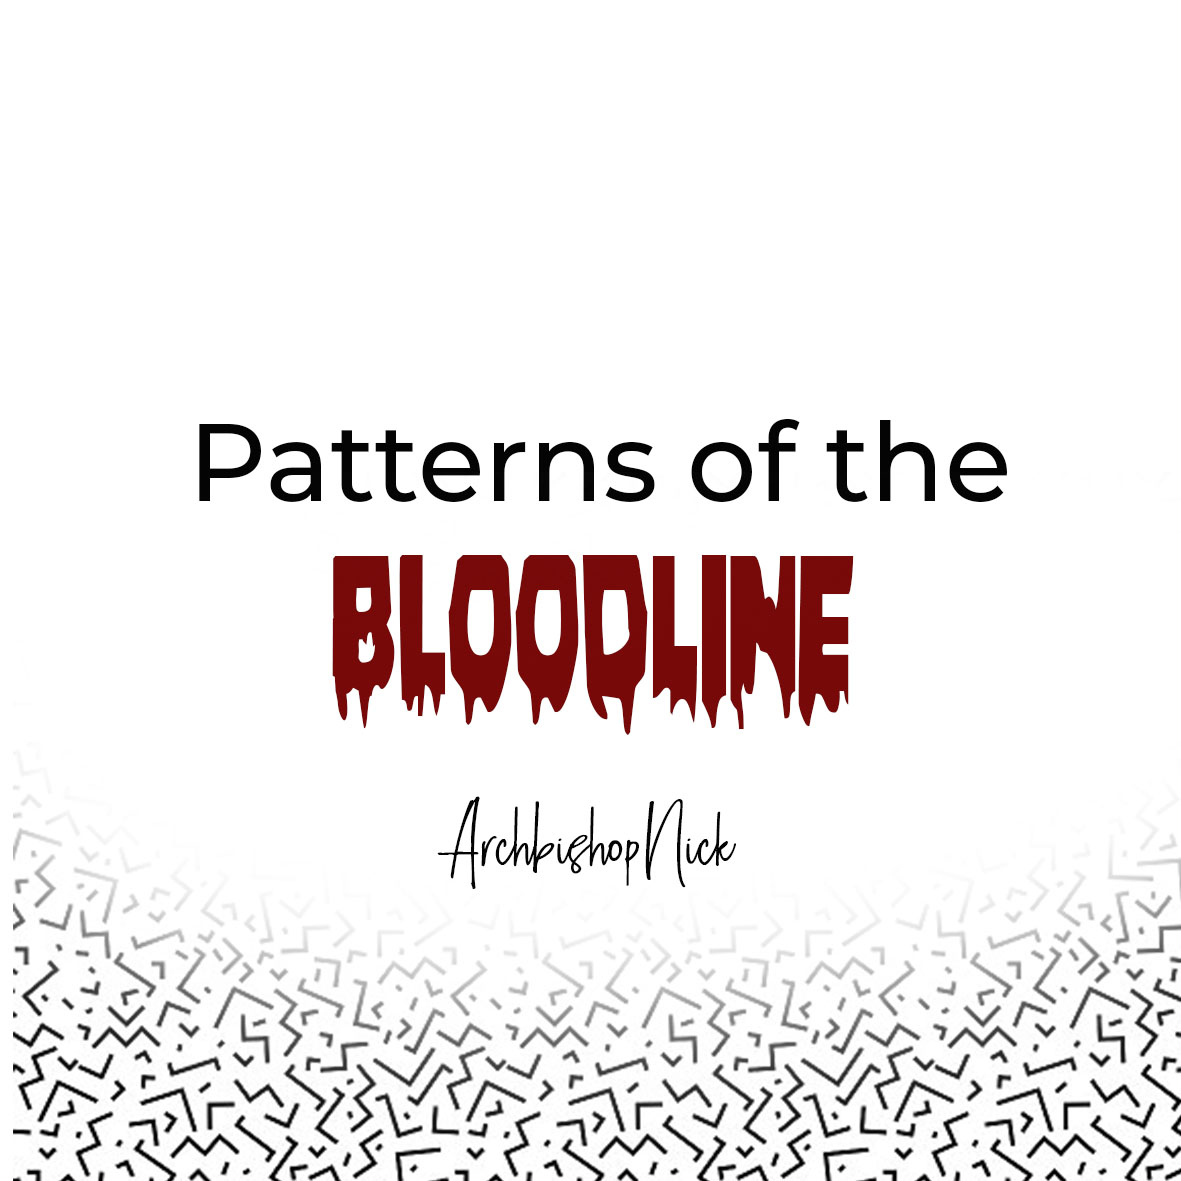 PATTERNS OF THE BLOODLINE